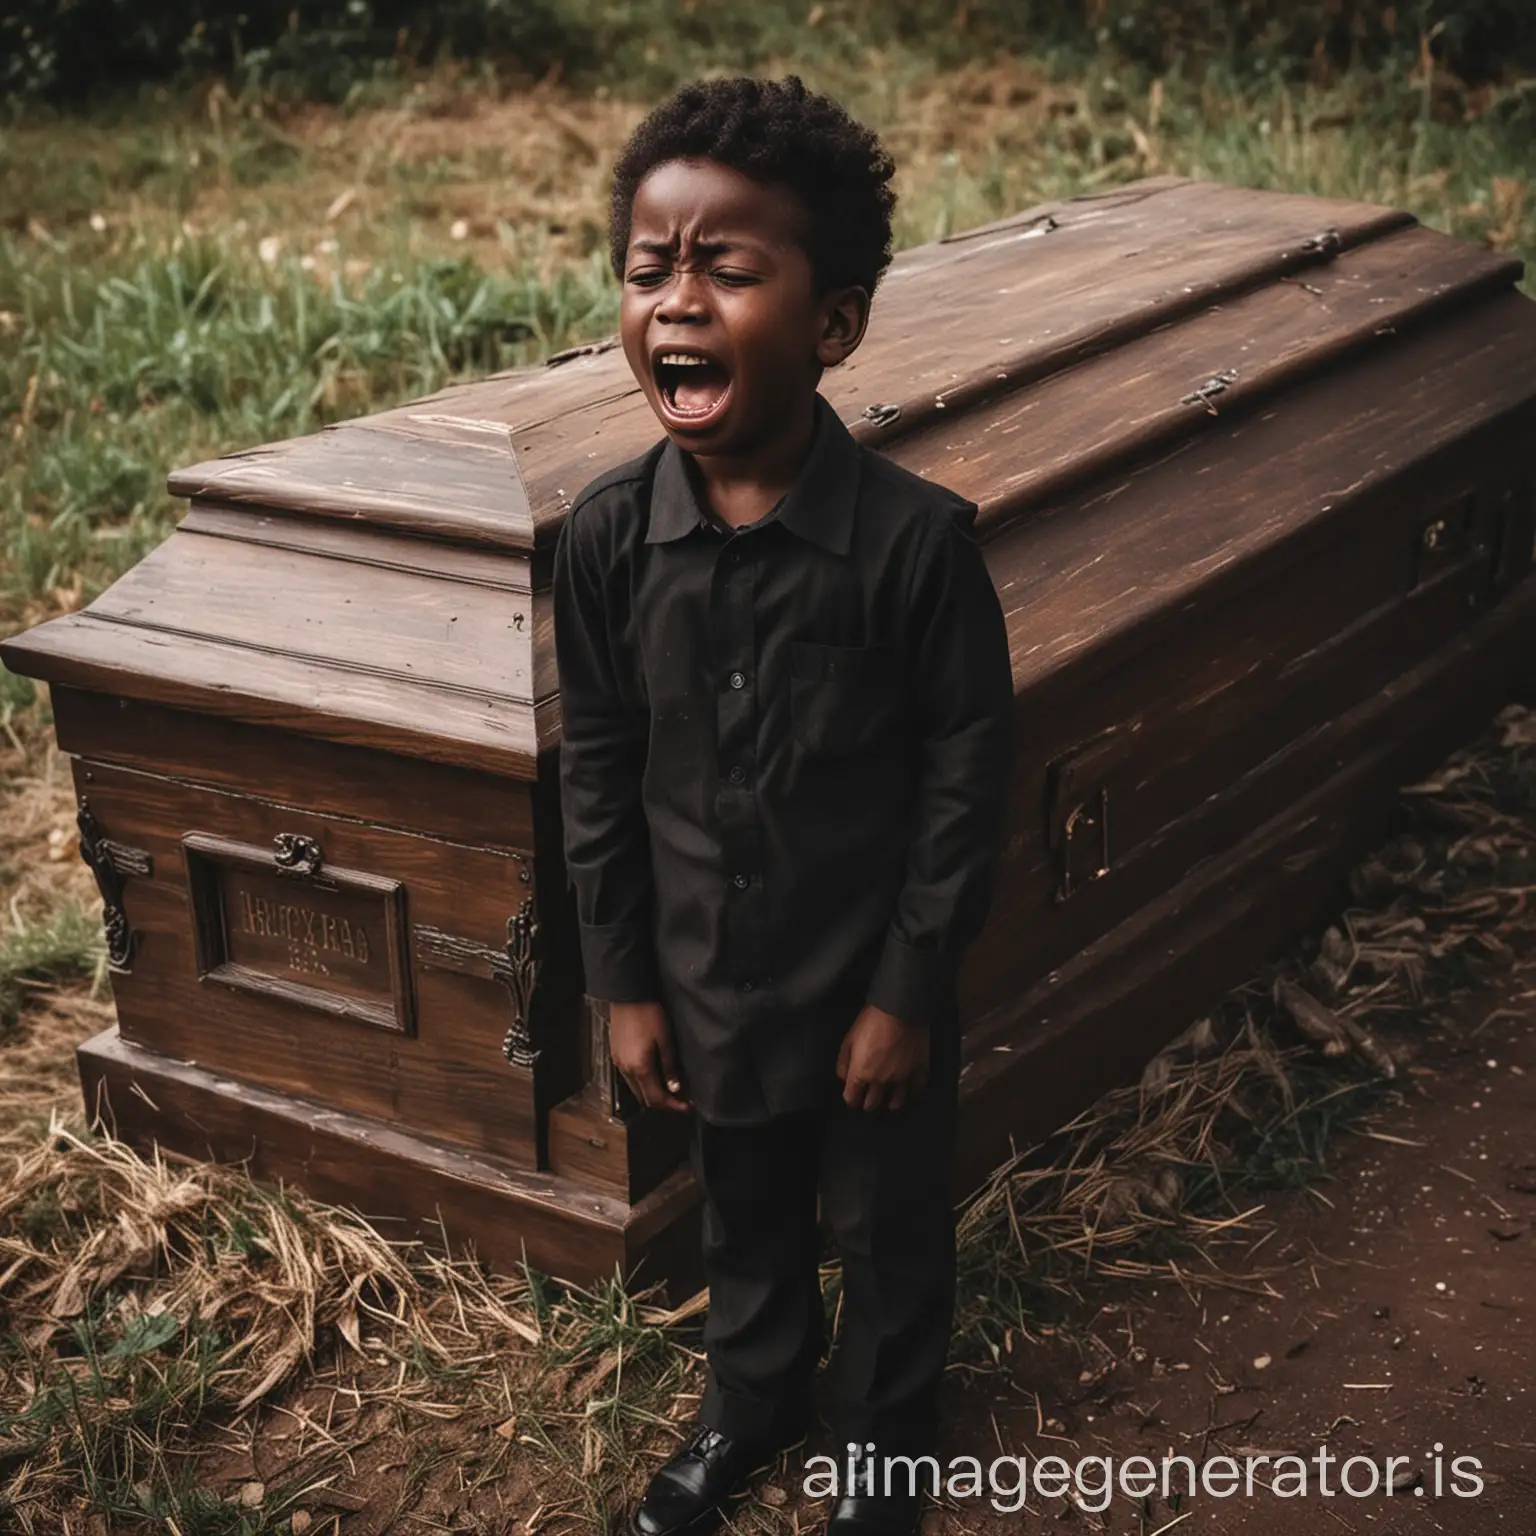 Give me a photo of a dark skinned boy crying next to a coffin box.
